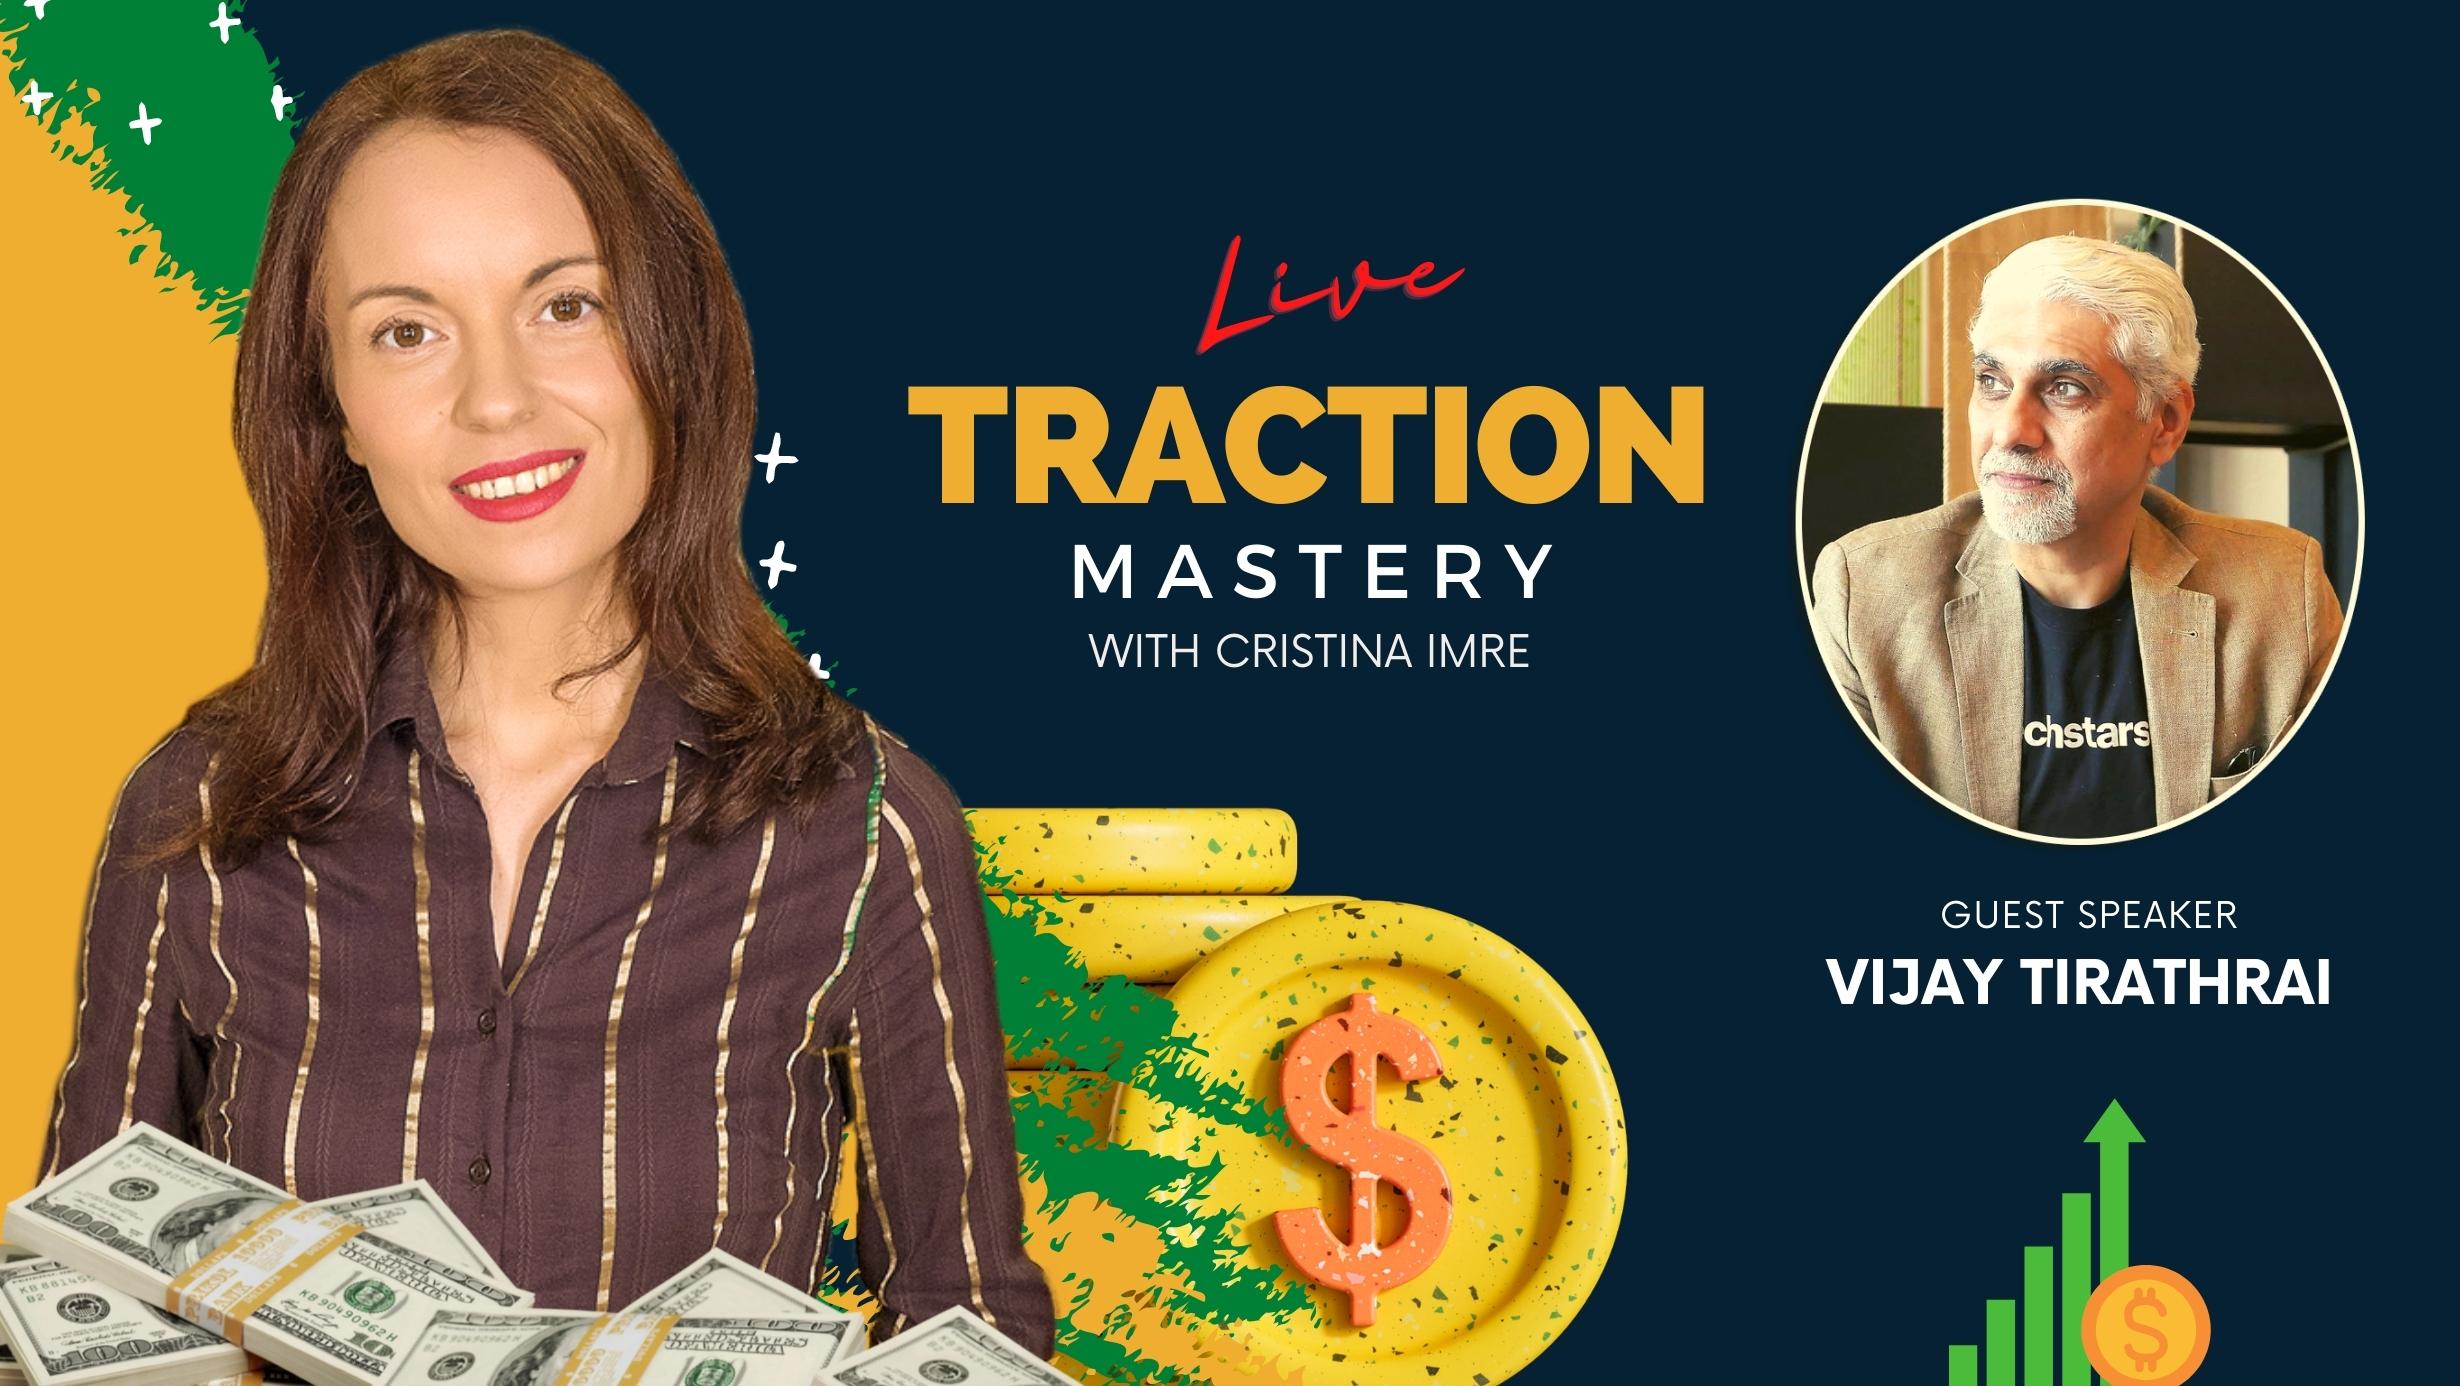 Traction Mastery Live Masterclass